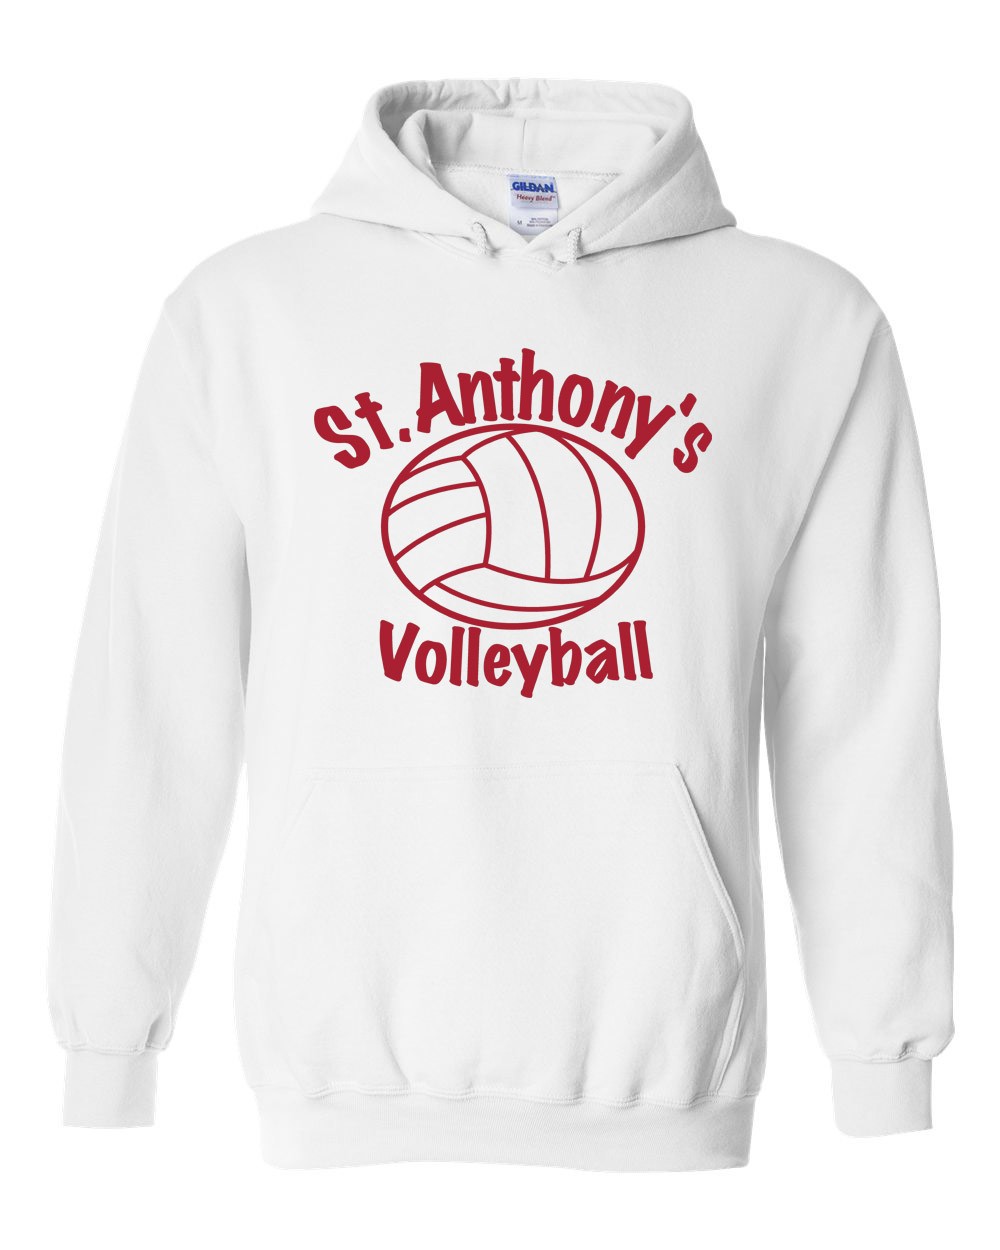 SAS Wht Volleyball Team Hoodie w/Logo & Name/Number - Please Allow 2-3 Weeks For Delivery 